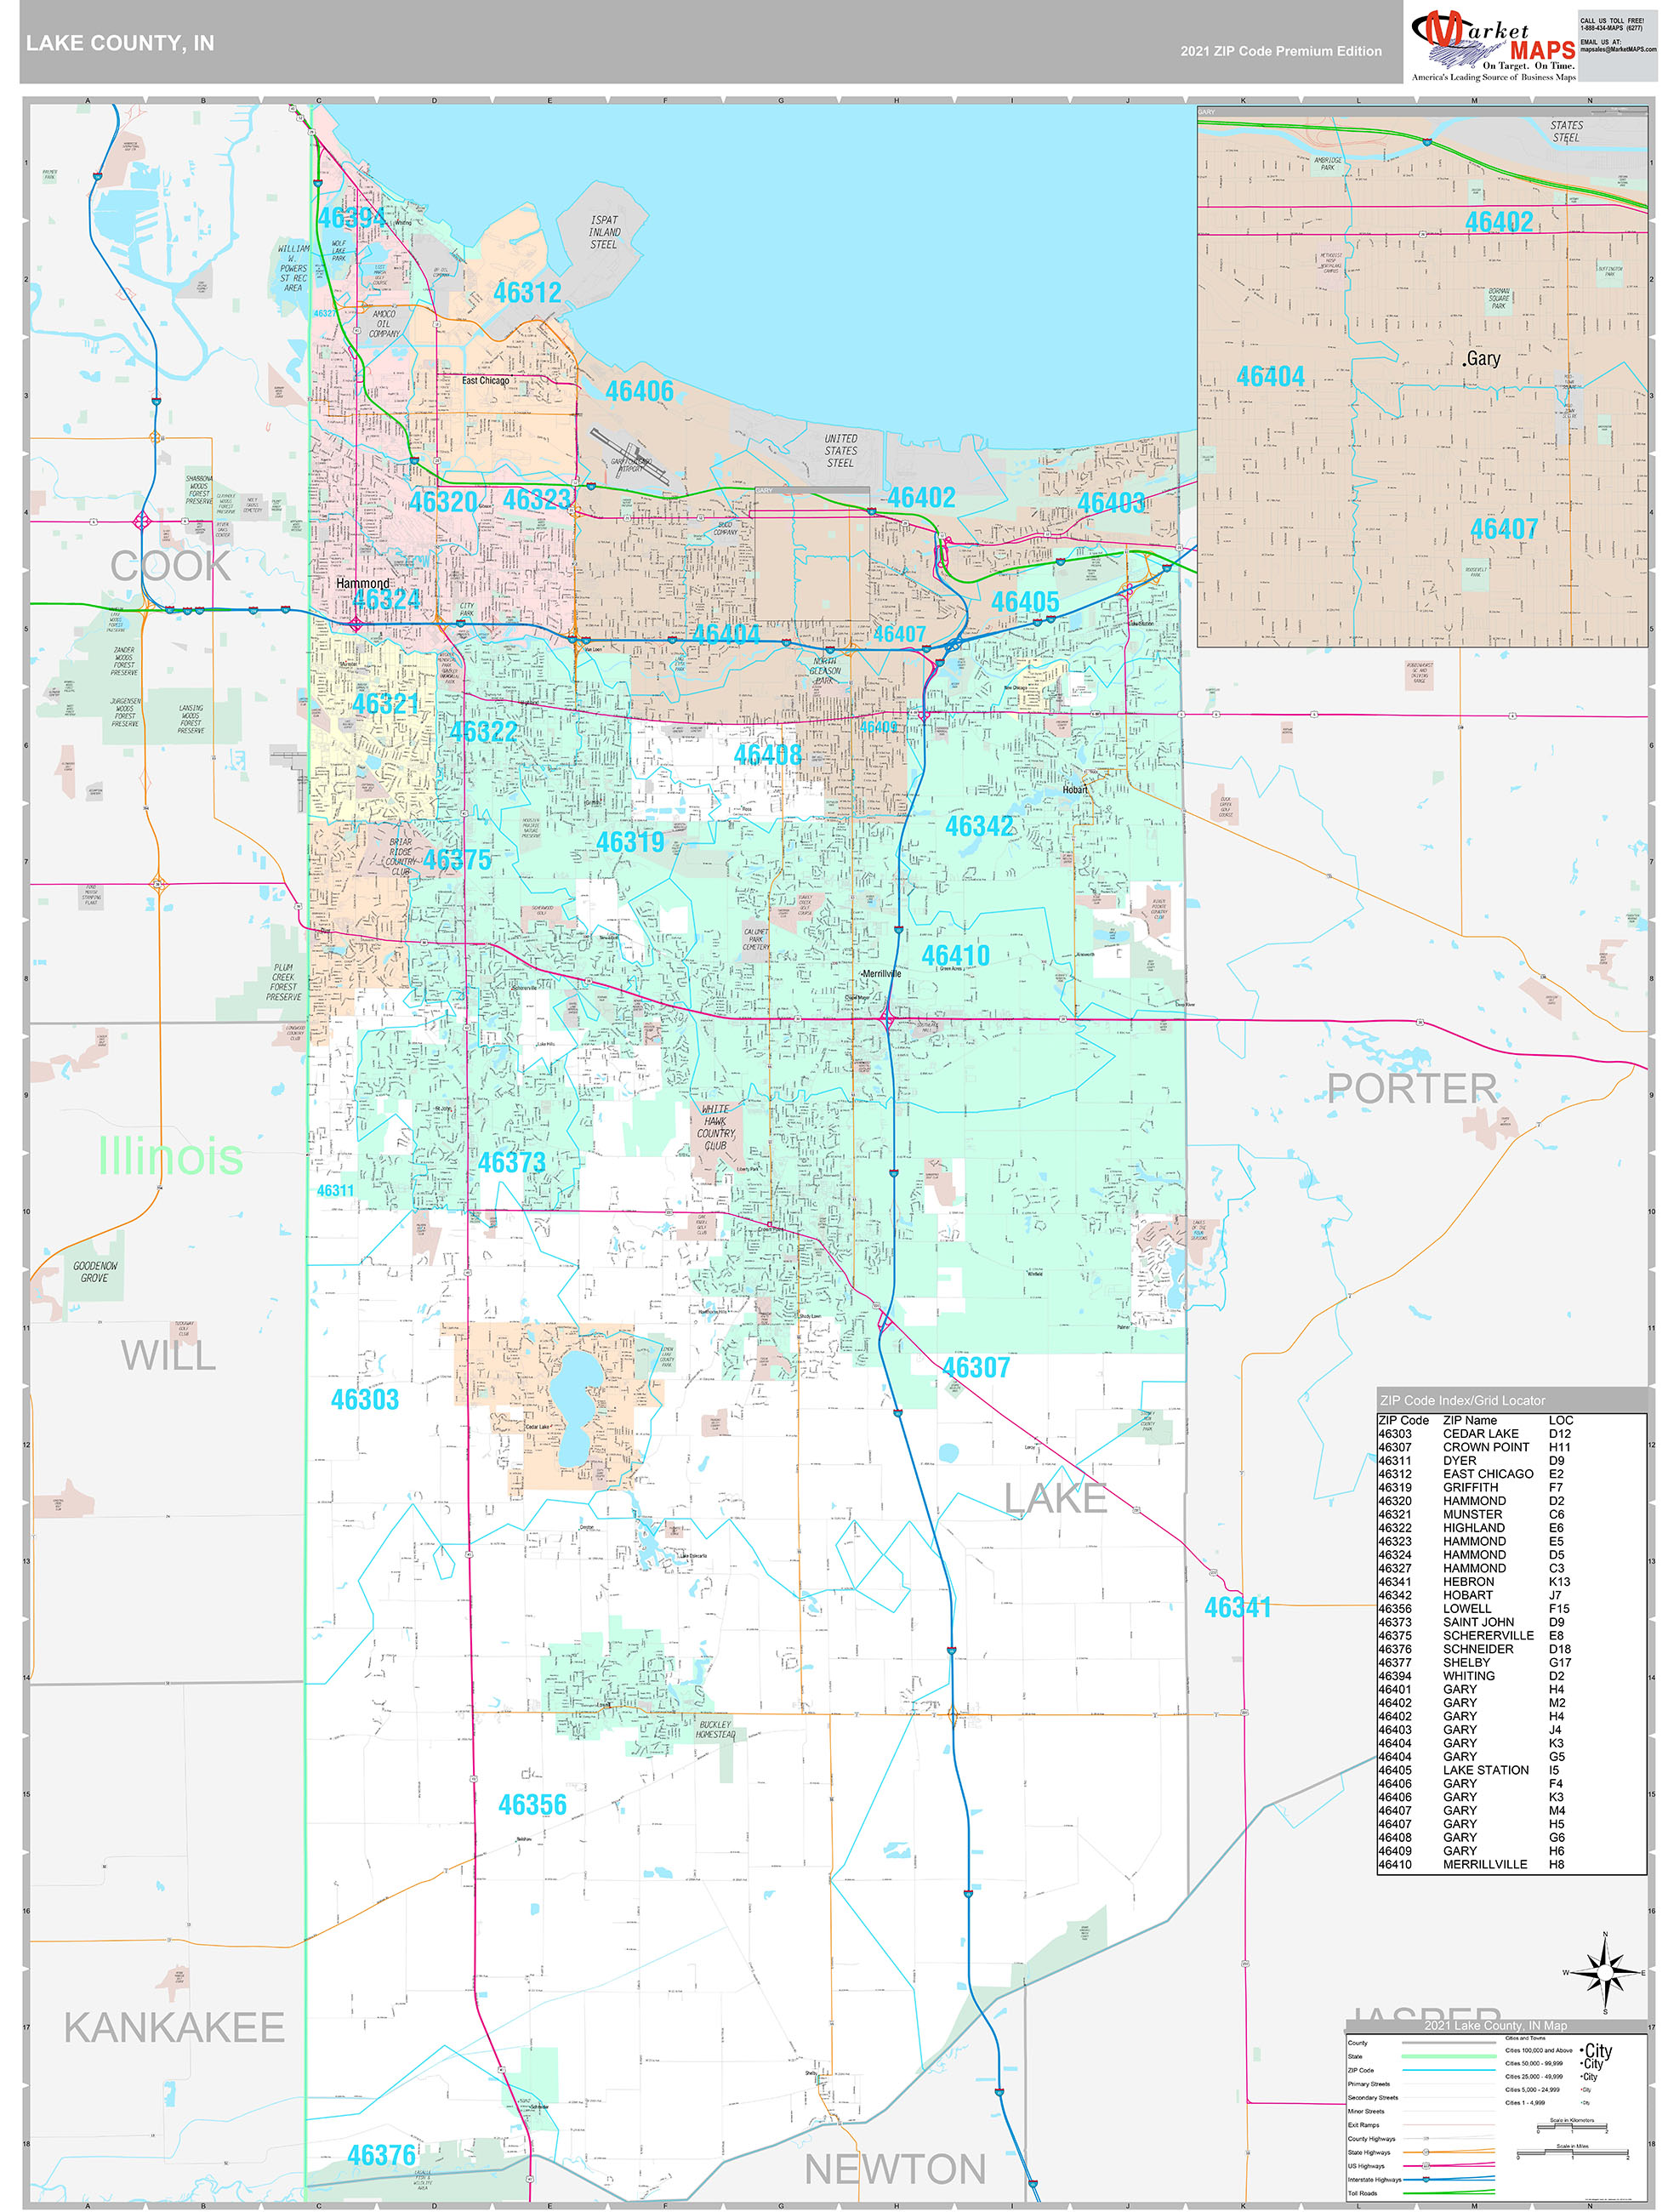 Lake County, IN Wall Map Premium Style by MarketMAPS MapSales